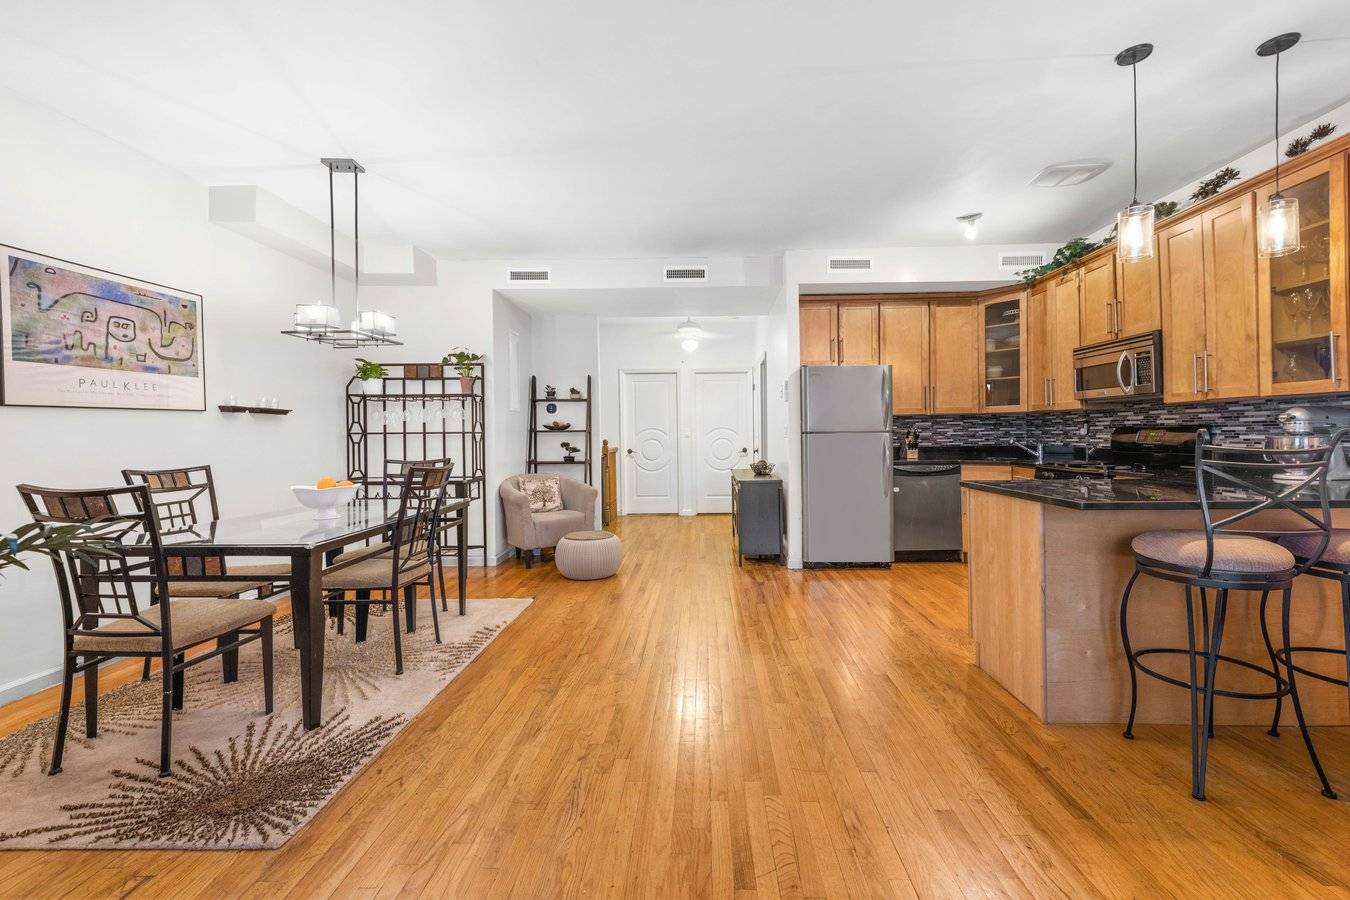 Welcome home to the Clinton Hill Village which is private and gated community.